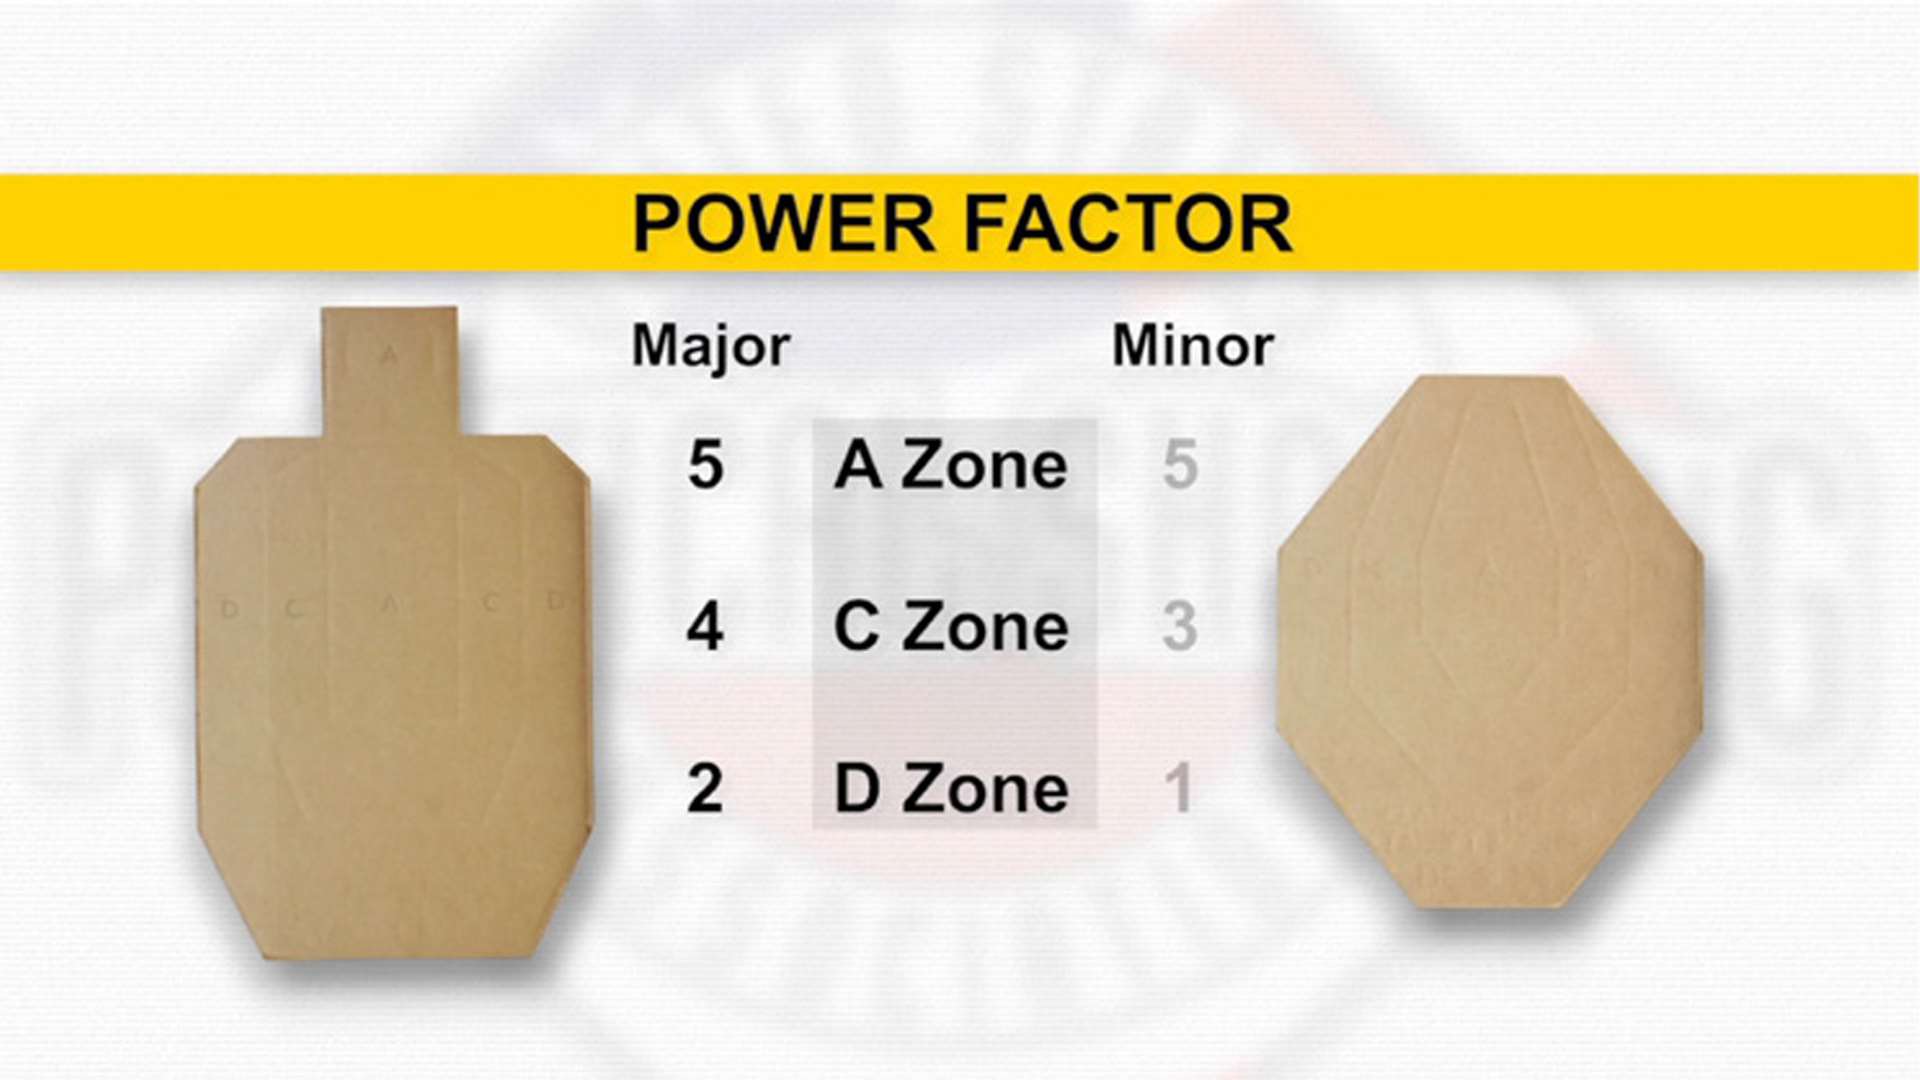 Power factor and targets for scoring